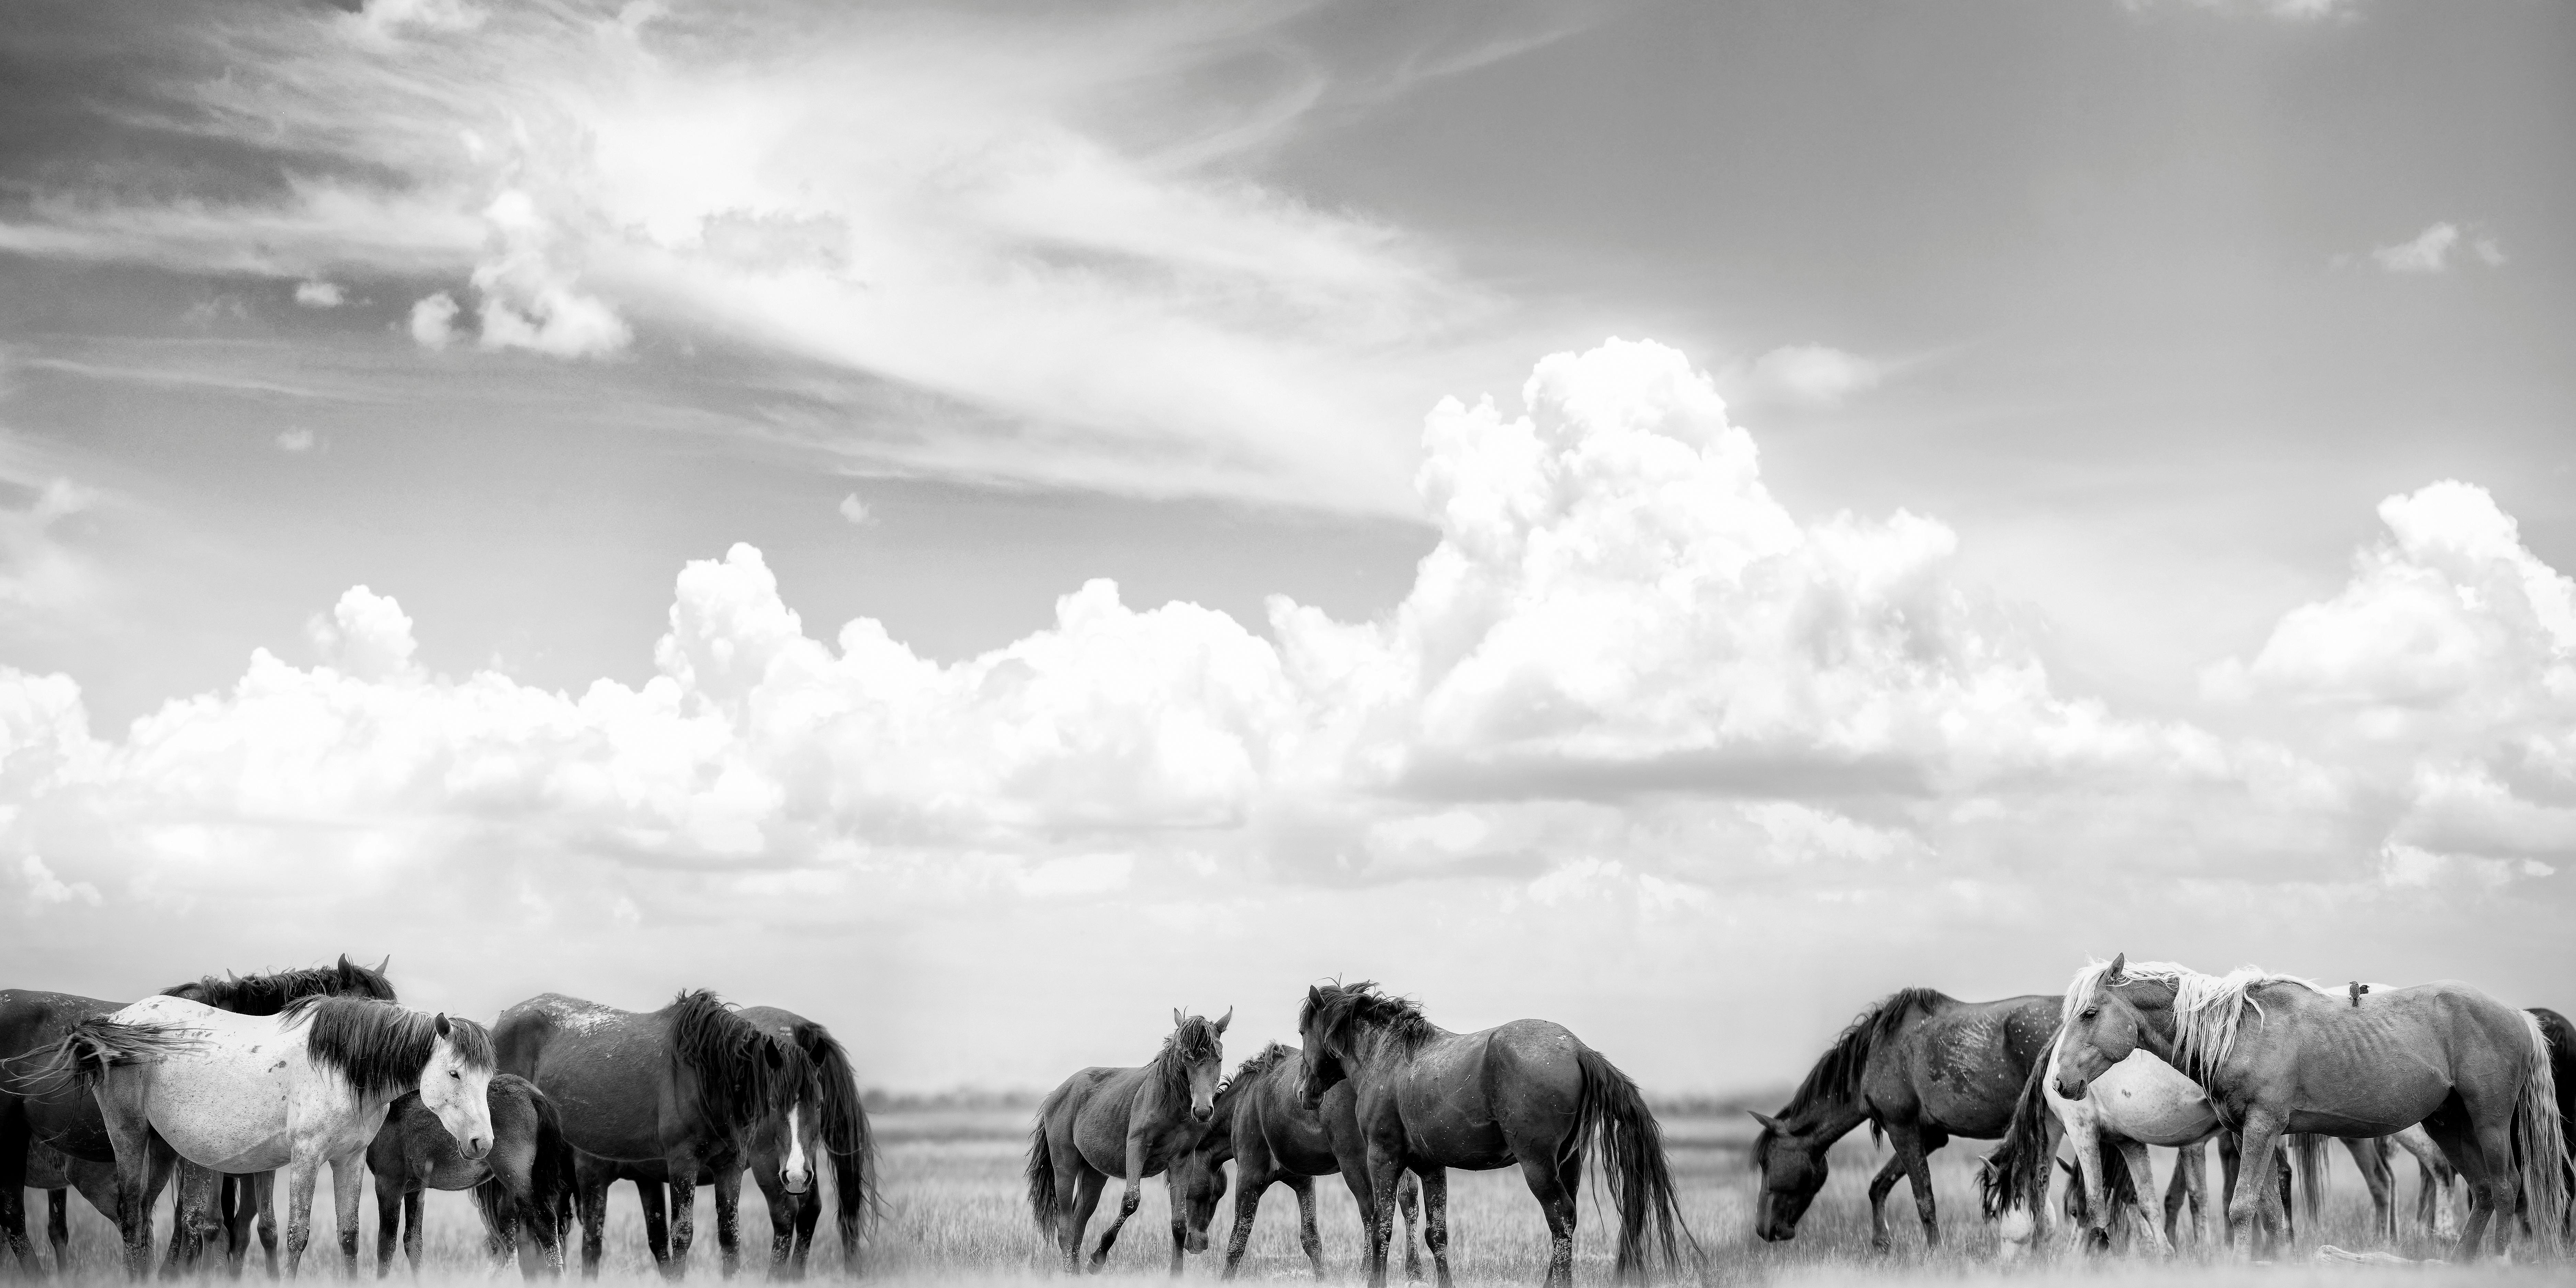 Shane Russeck Black and White Photograph - "On Any Sunday" - 50x25 Wild Horse Photography, fine Art Photograph